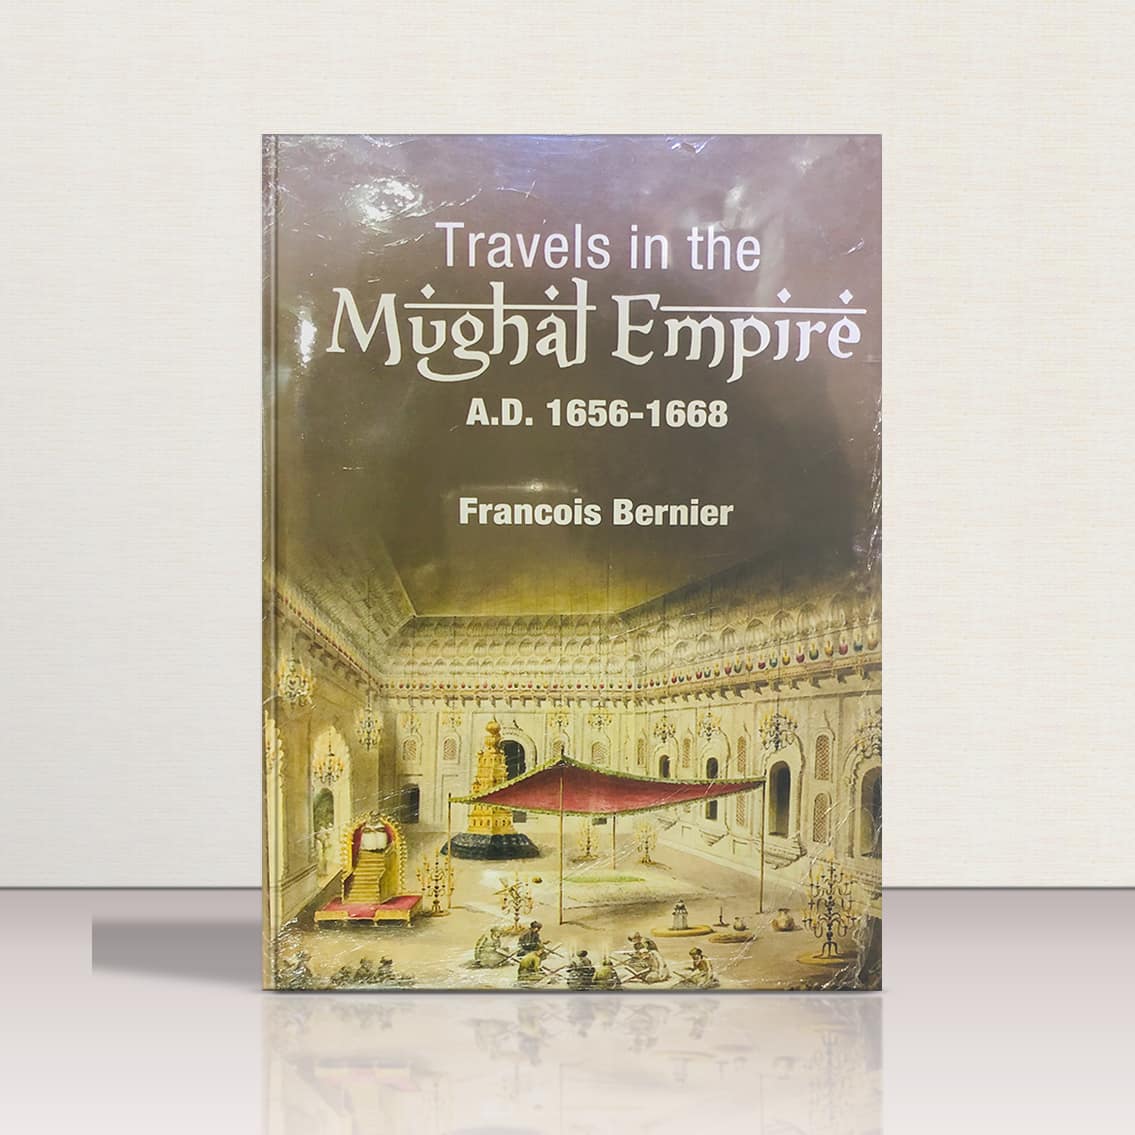 Travels in the Mughal Empire by Francois Bernier